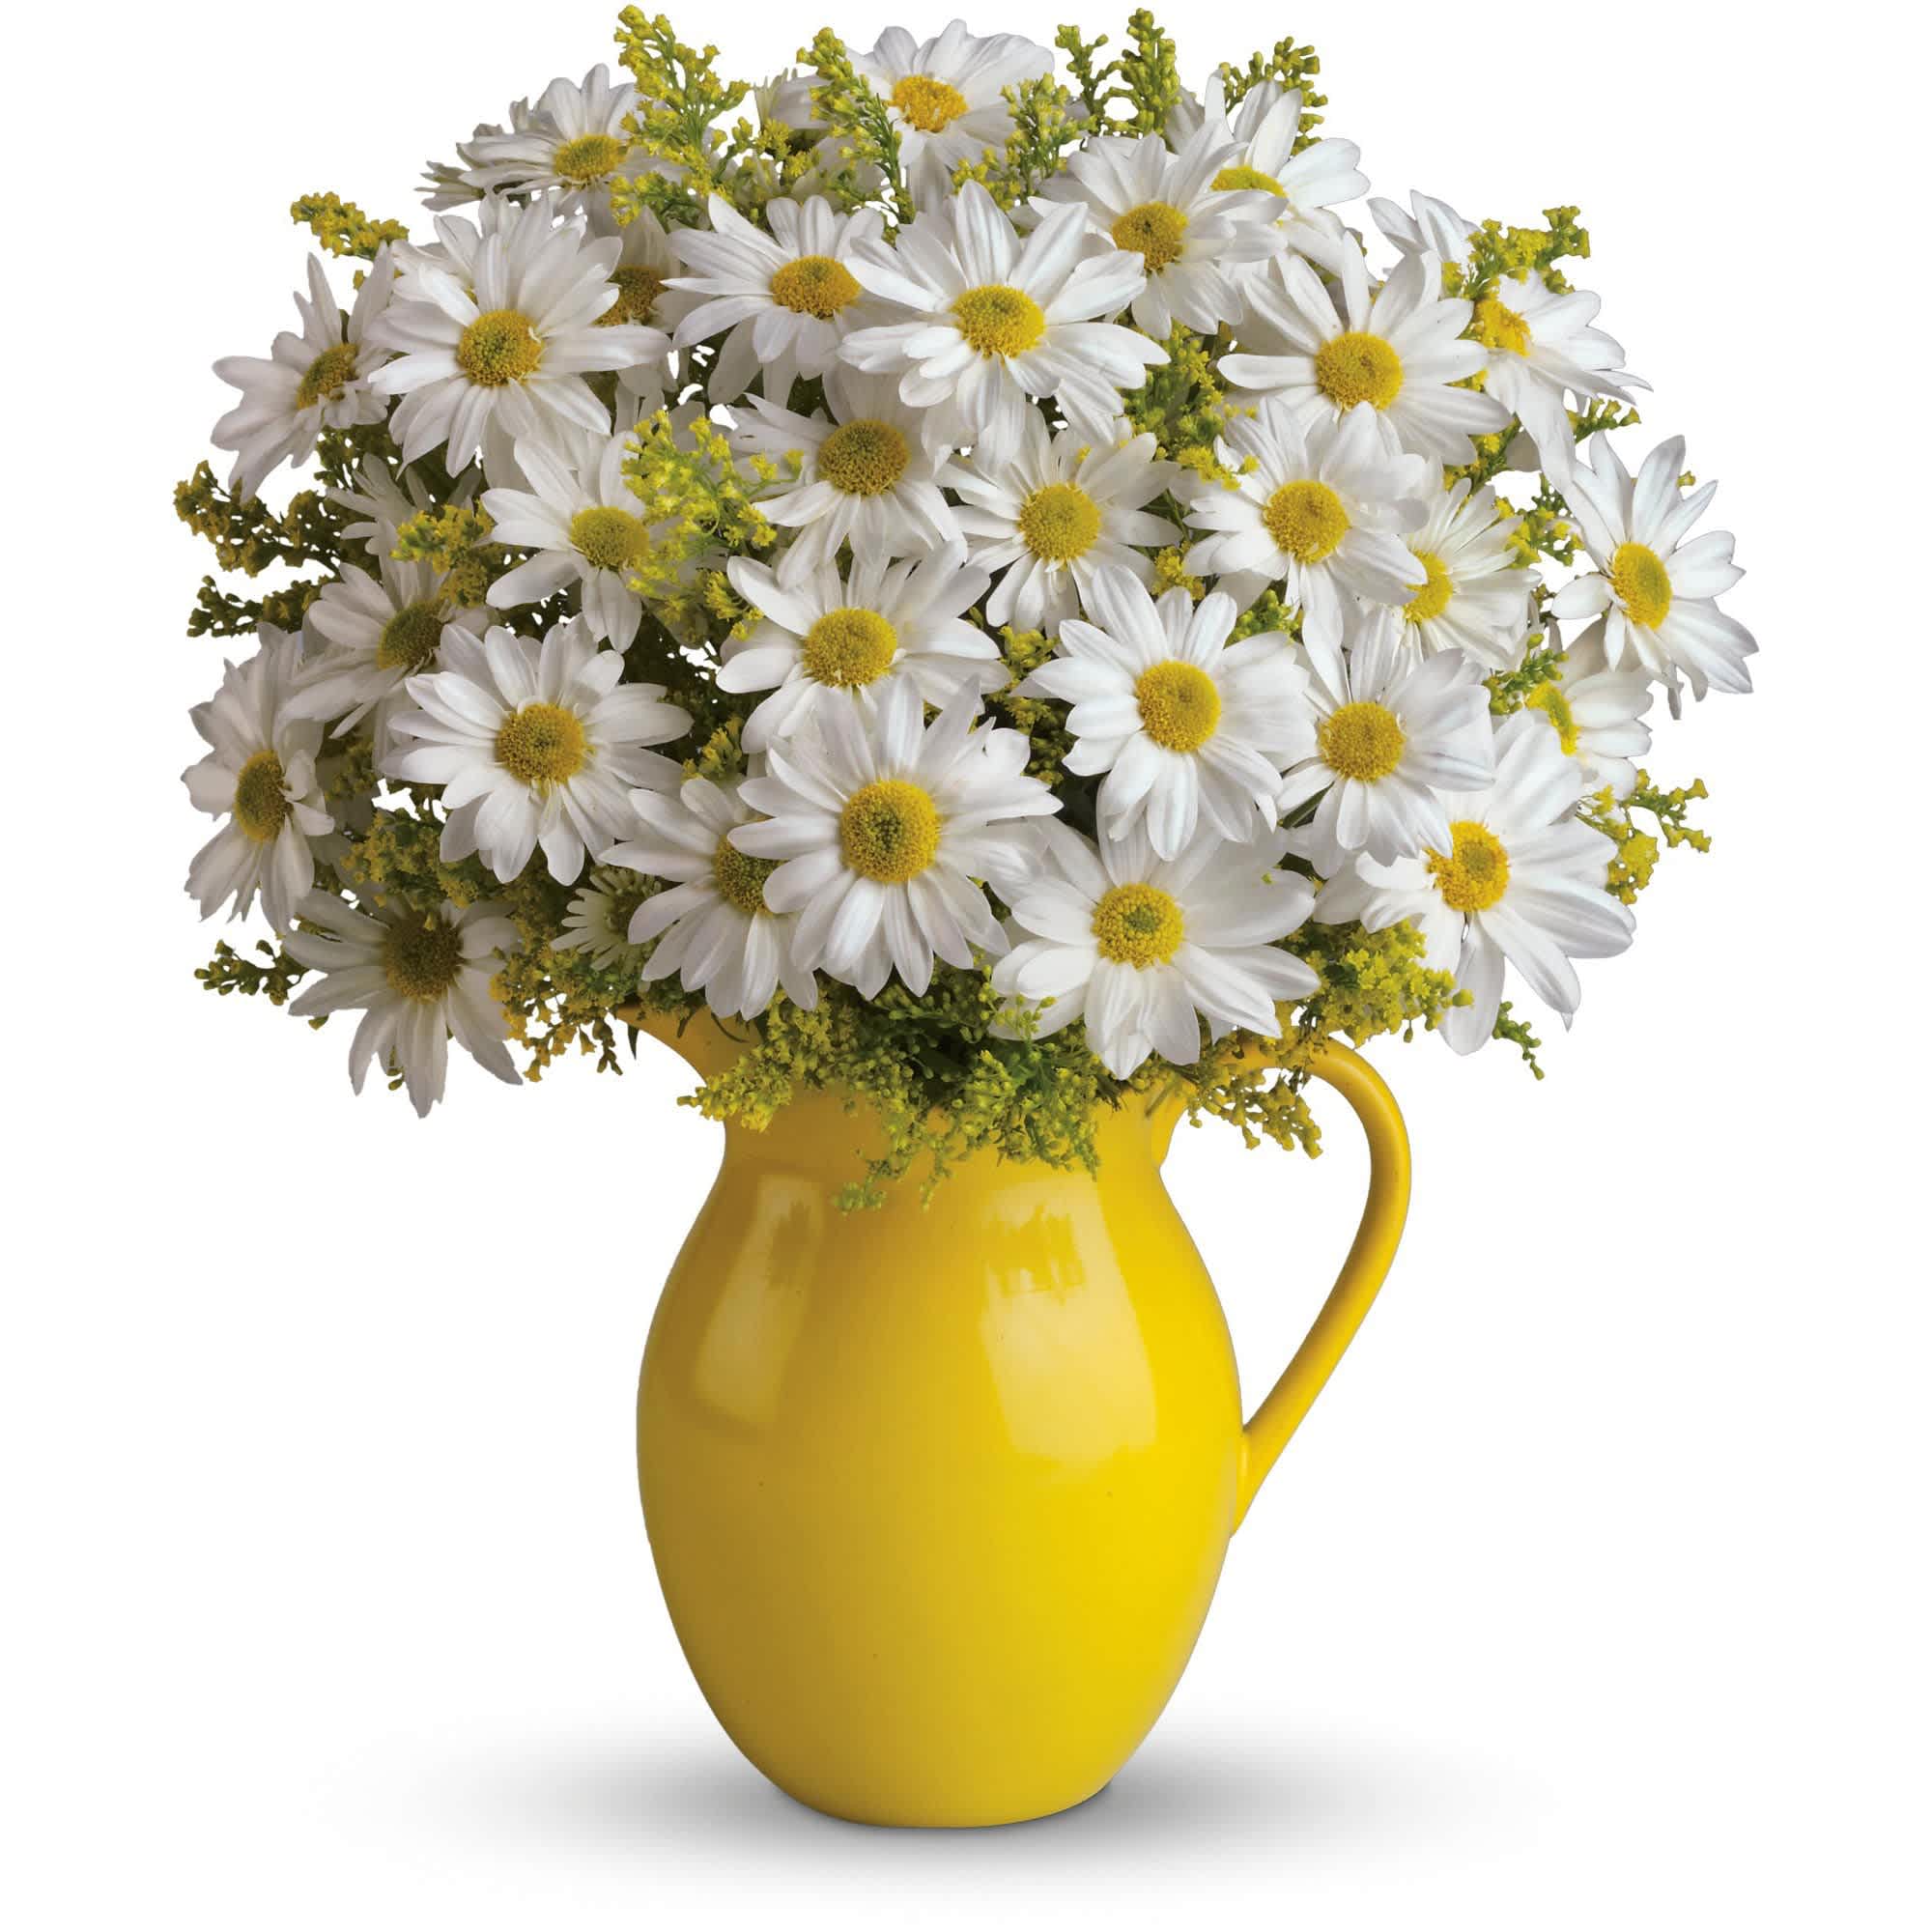 Teleflora's Sunny Day Pitcher of Daisies - Picture someone receiving this sunny pitcher of daisies! It's so bright and full of warmth, it's guaranteed to make them smile. Besides being the perfect bouquet for any occasion, the dazzling yellow ceramic pitcher can be used and enjoyed for years to come.  